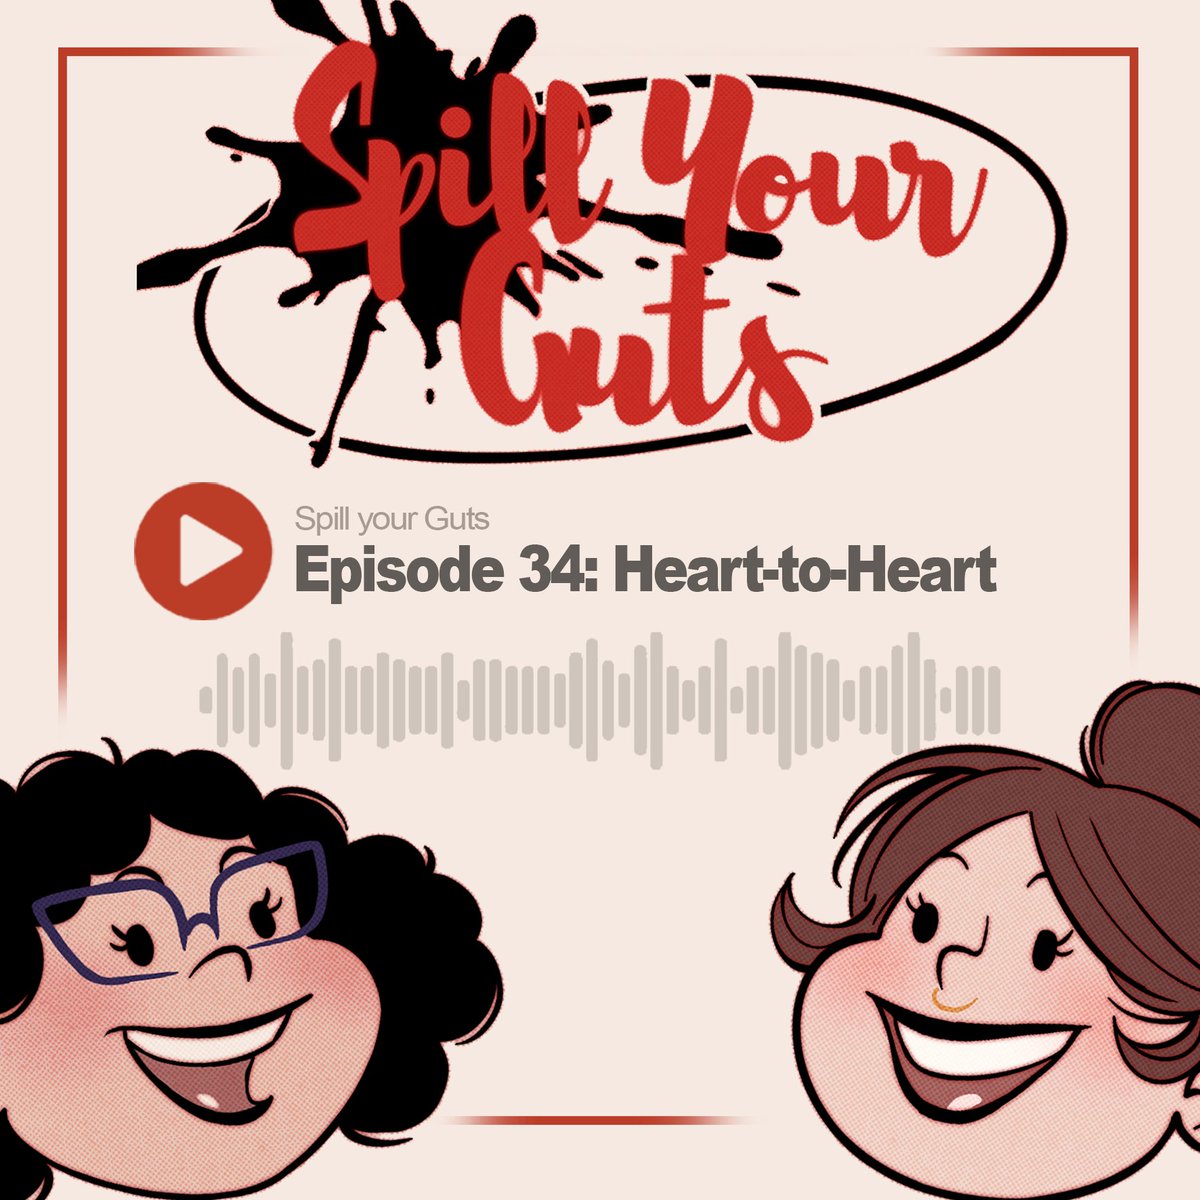 It's spring outside, the flowers are in bloom , it's a new Spill Your Guts Monday! We're back at ranting about our lives. We talk about the bumpy ride that was the month of April, and Baby Reindeer. spillyourgutspodcast.buzzsprout.com Thanks for listening! 🎙️📷✨